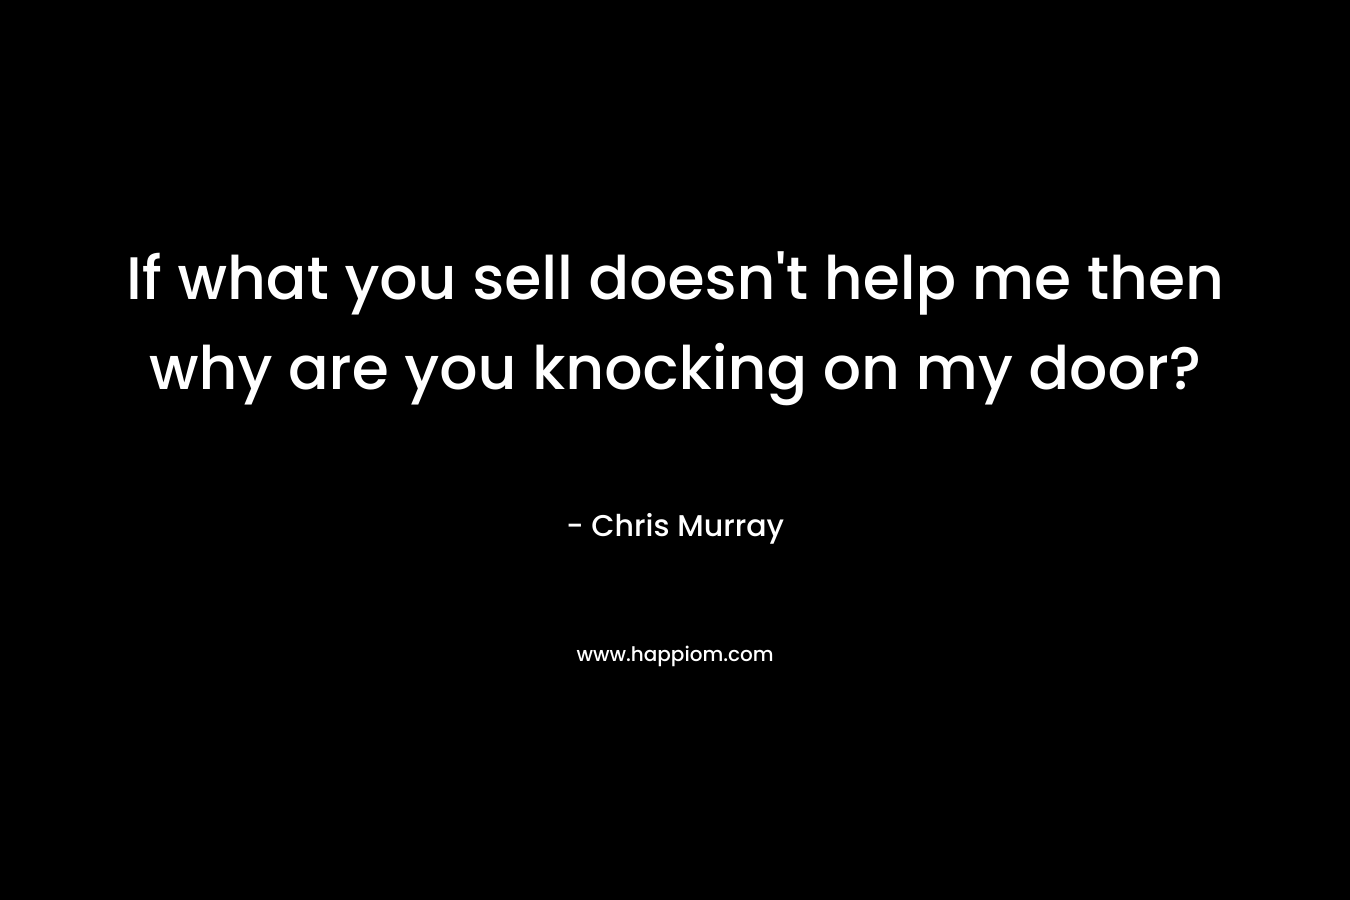 If what you sell doesn't help me then why are you knocking on my door?